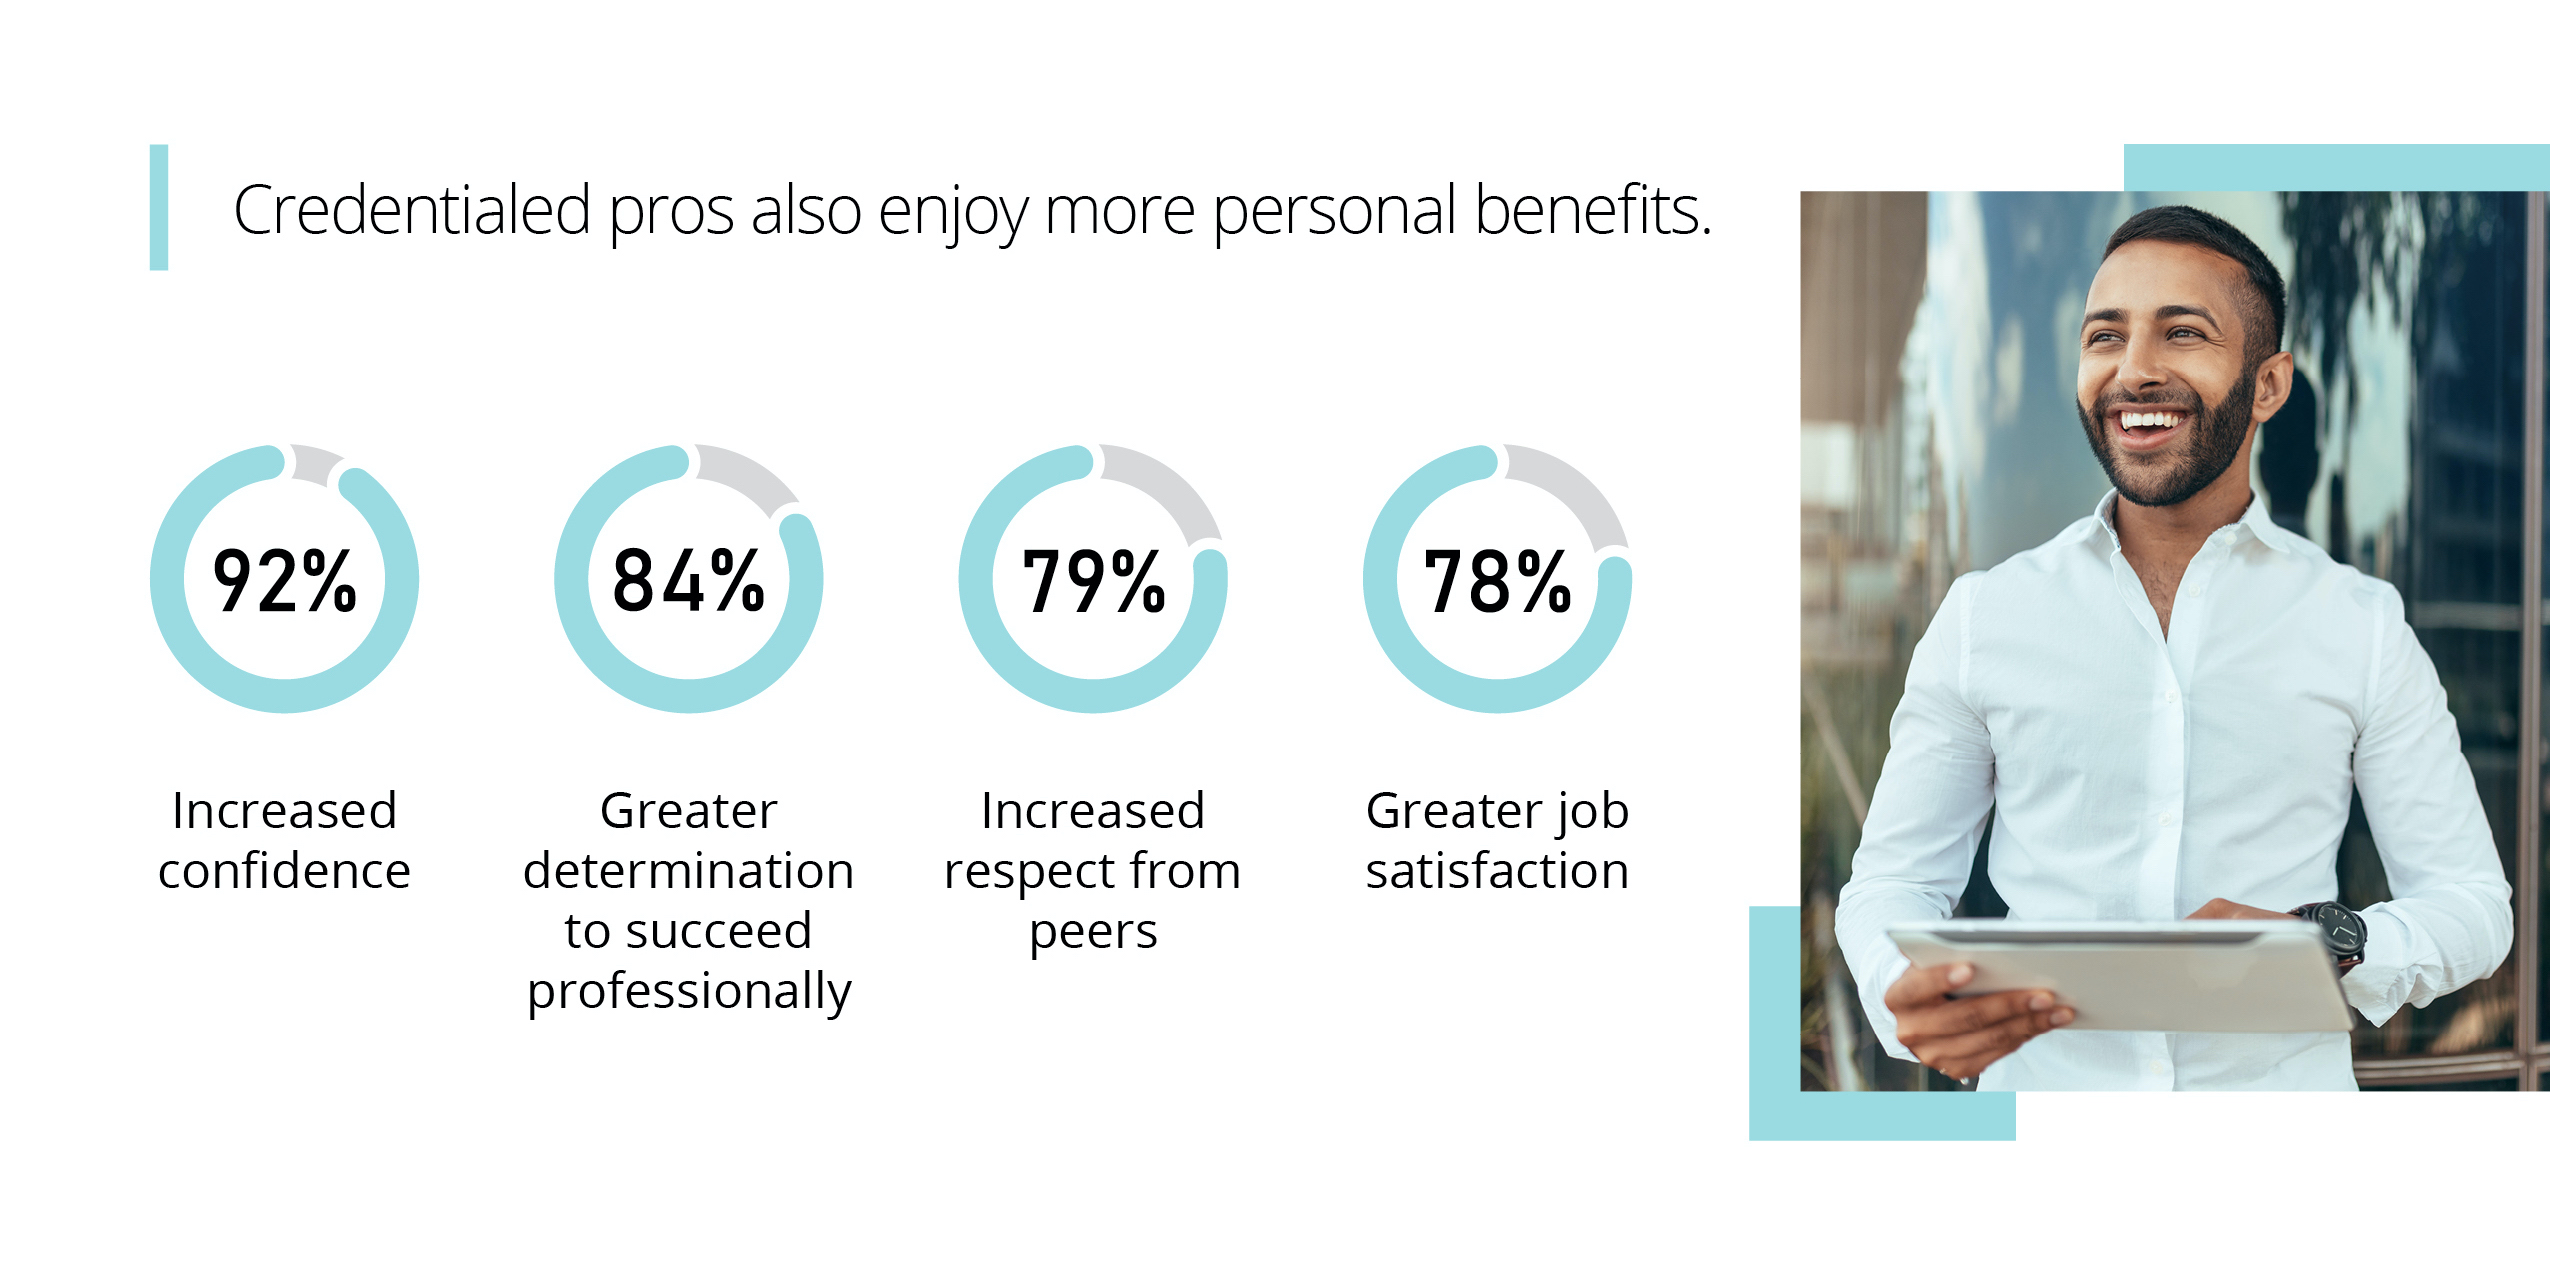 Credentialed pros also enjoy more personal benefits: 92% increased confidence, 84% greater determination to succeed professionally, 79% increased respect from peers, 78% greater job satisfaction.